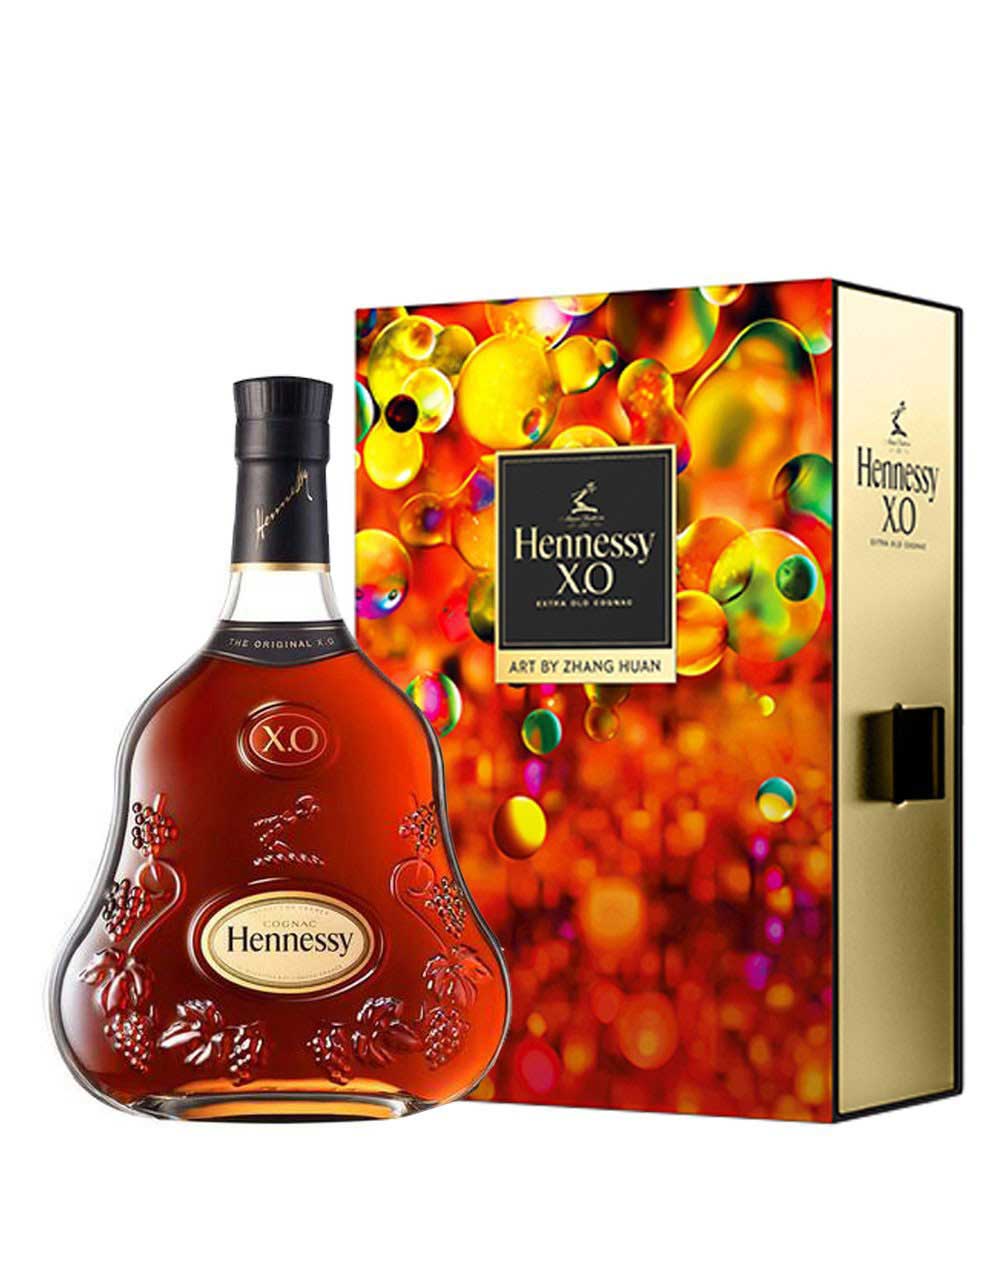 Hennessy X.O with Limited Edition Gift Box